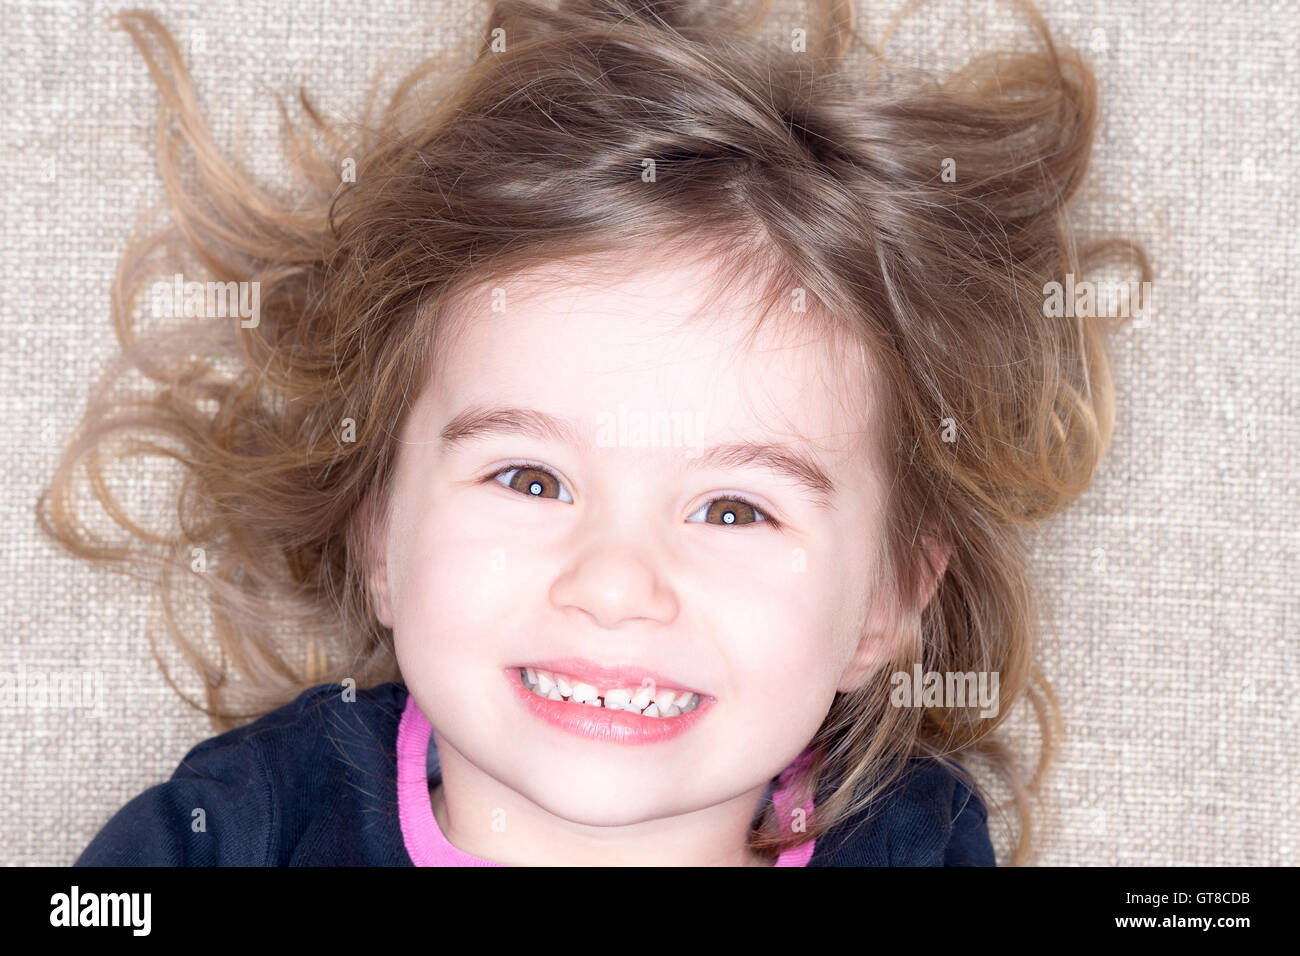 Headshot of young three year old girl lying on a carpet with tousled hair grinning up at the camera with a happy expression Stock Photo